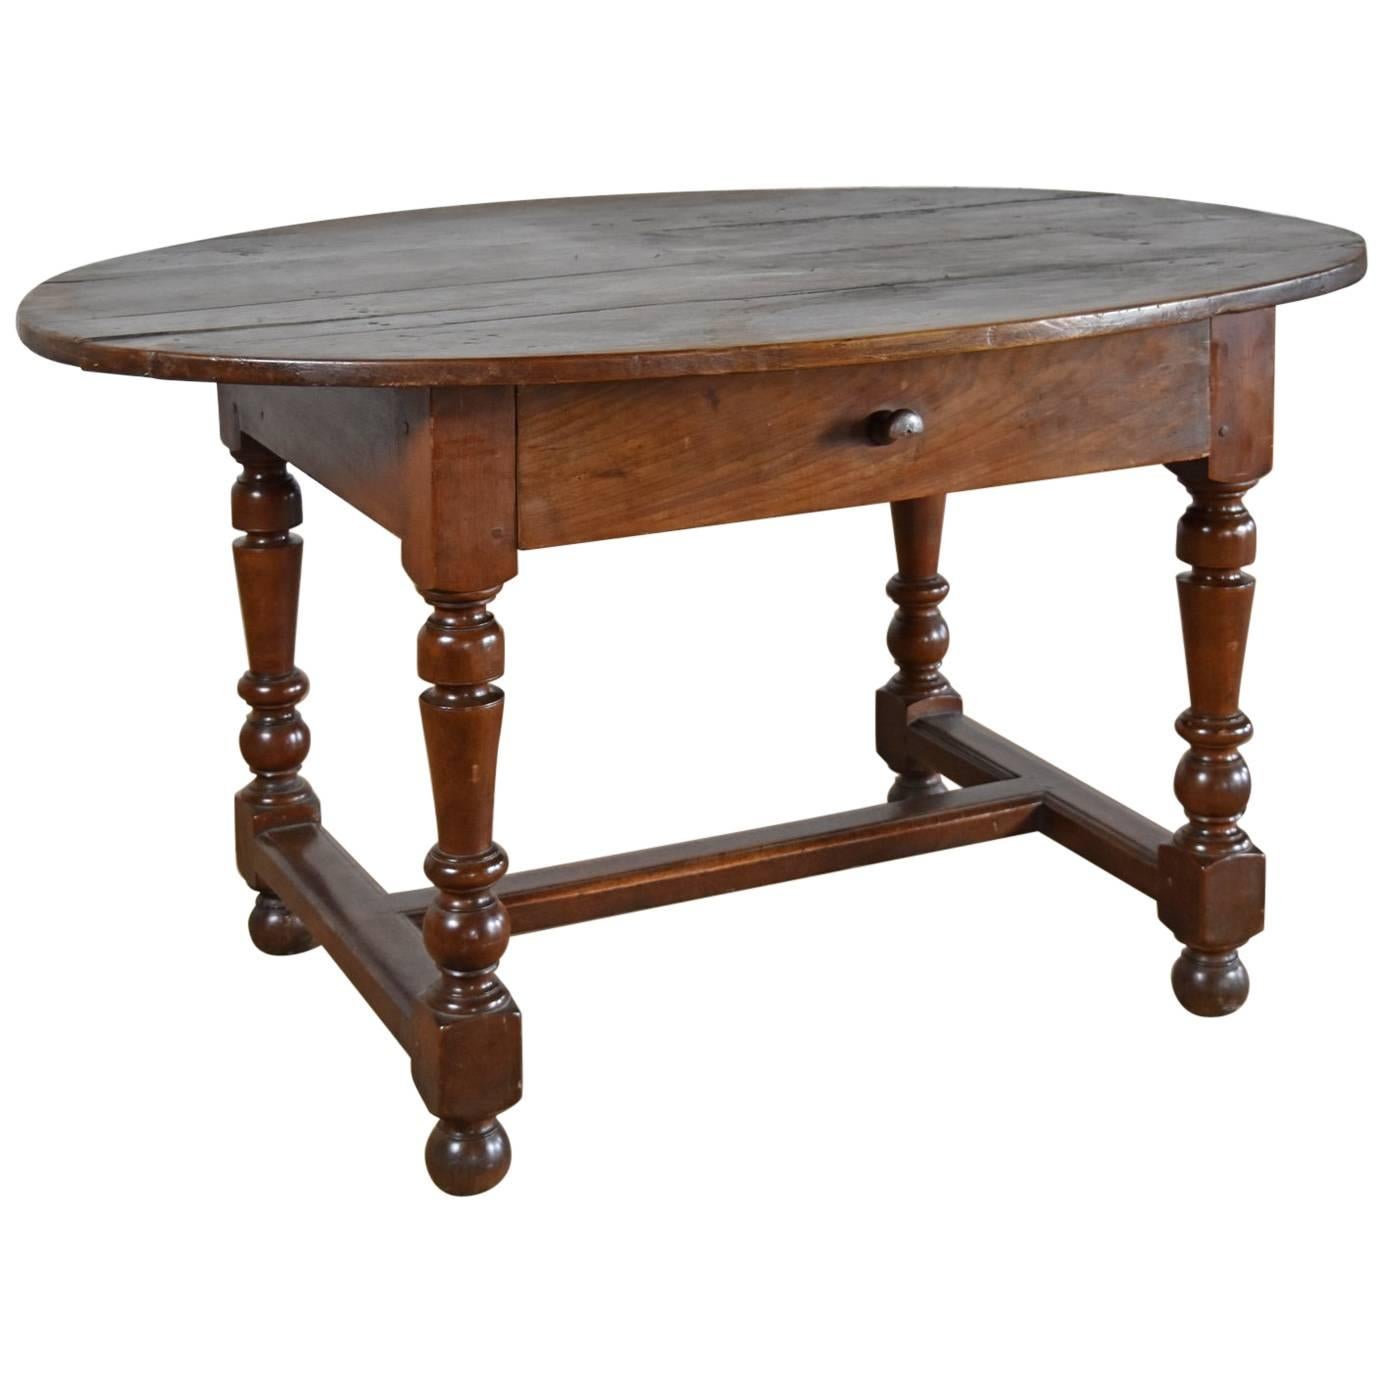 French Baroque Louis XIII Period 17th Century Oval Walnut Table For Sale